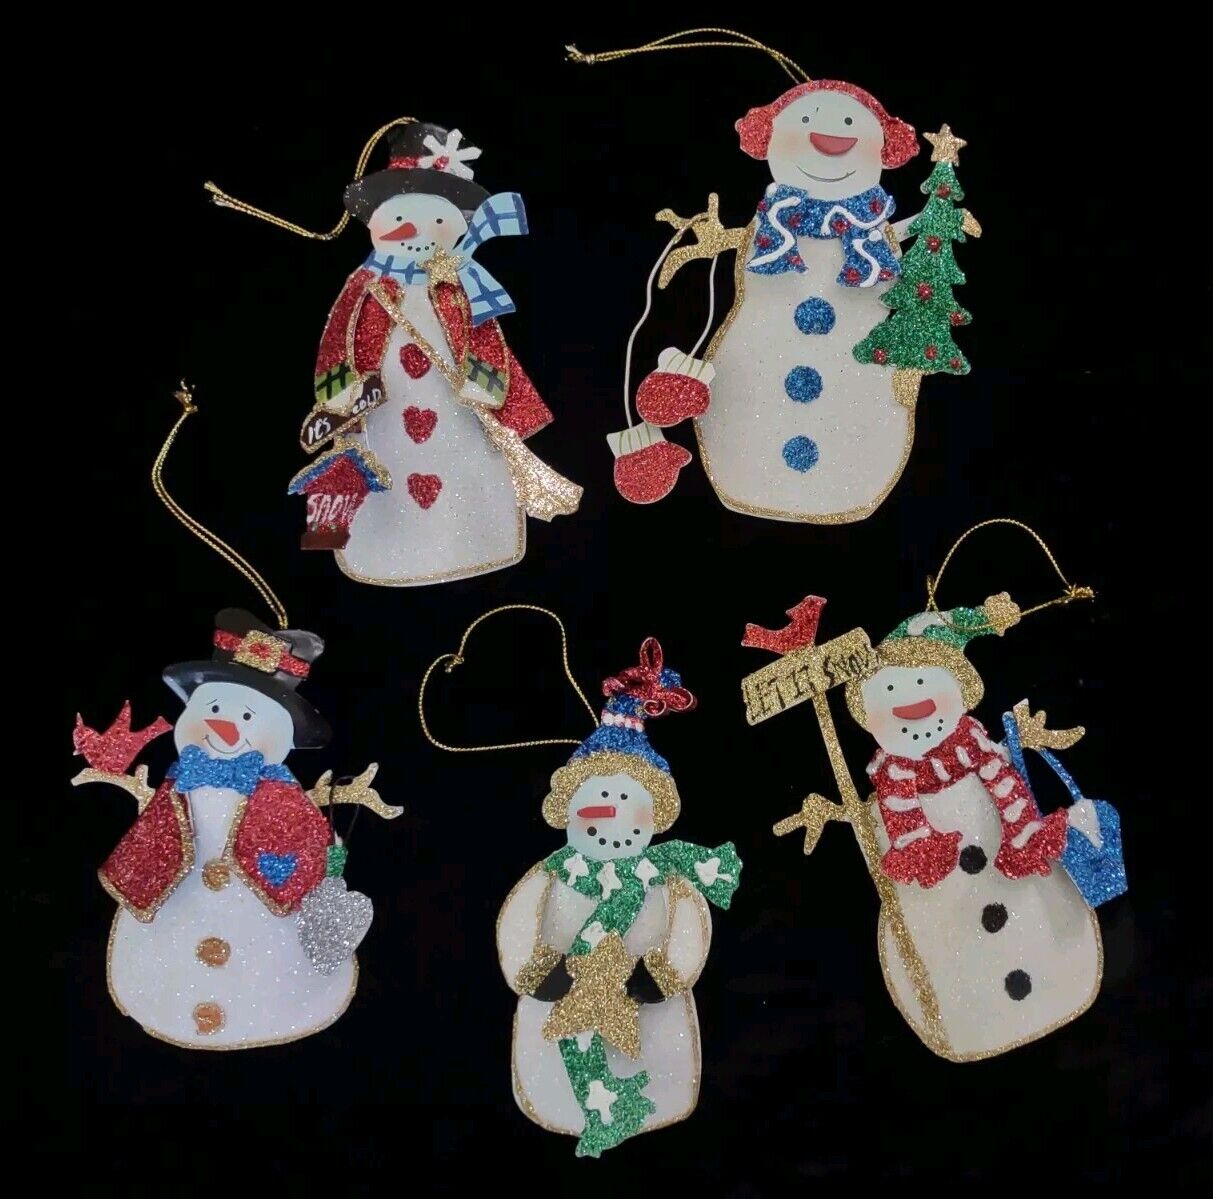 Five Metal Glitter Covered Snowman Christmas Ornaments